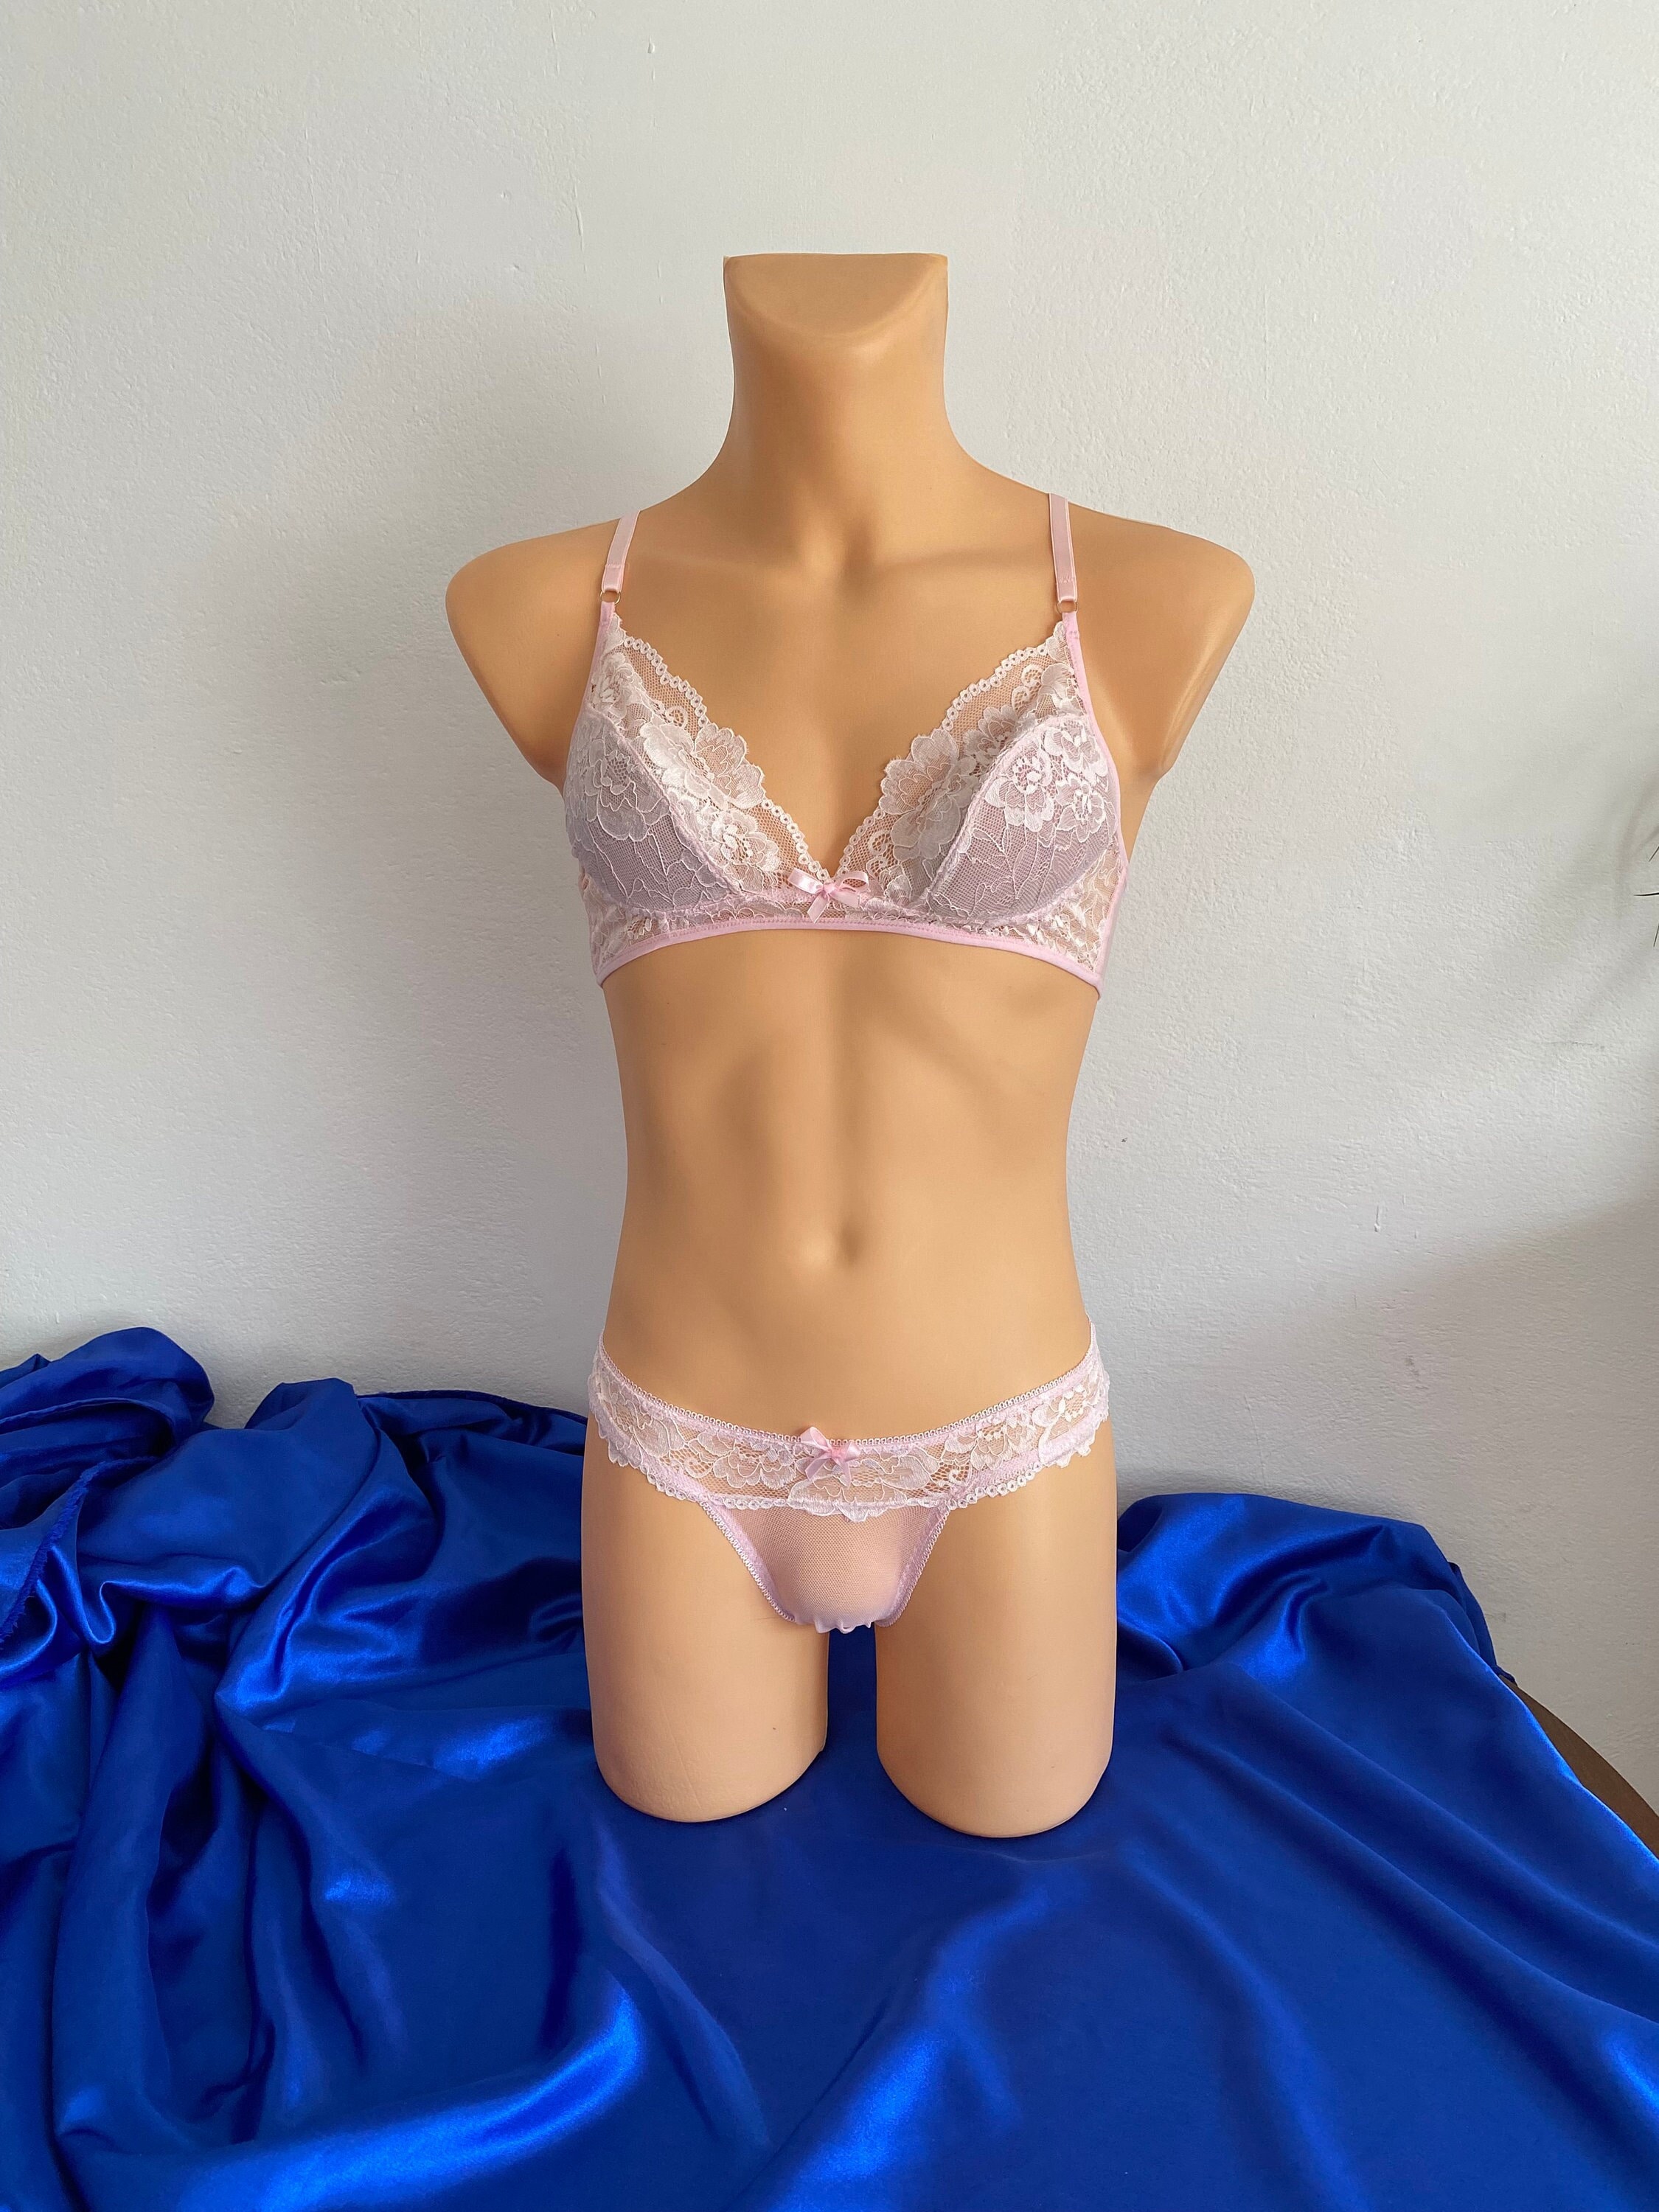 Plus Size Bras 36-52 AA-F Lace Sheer Sissy Sexy Lingerie straight